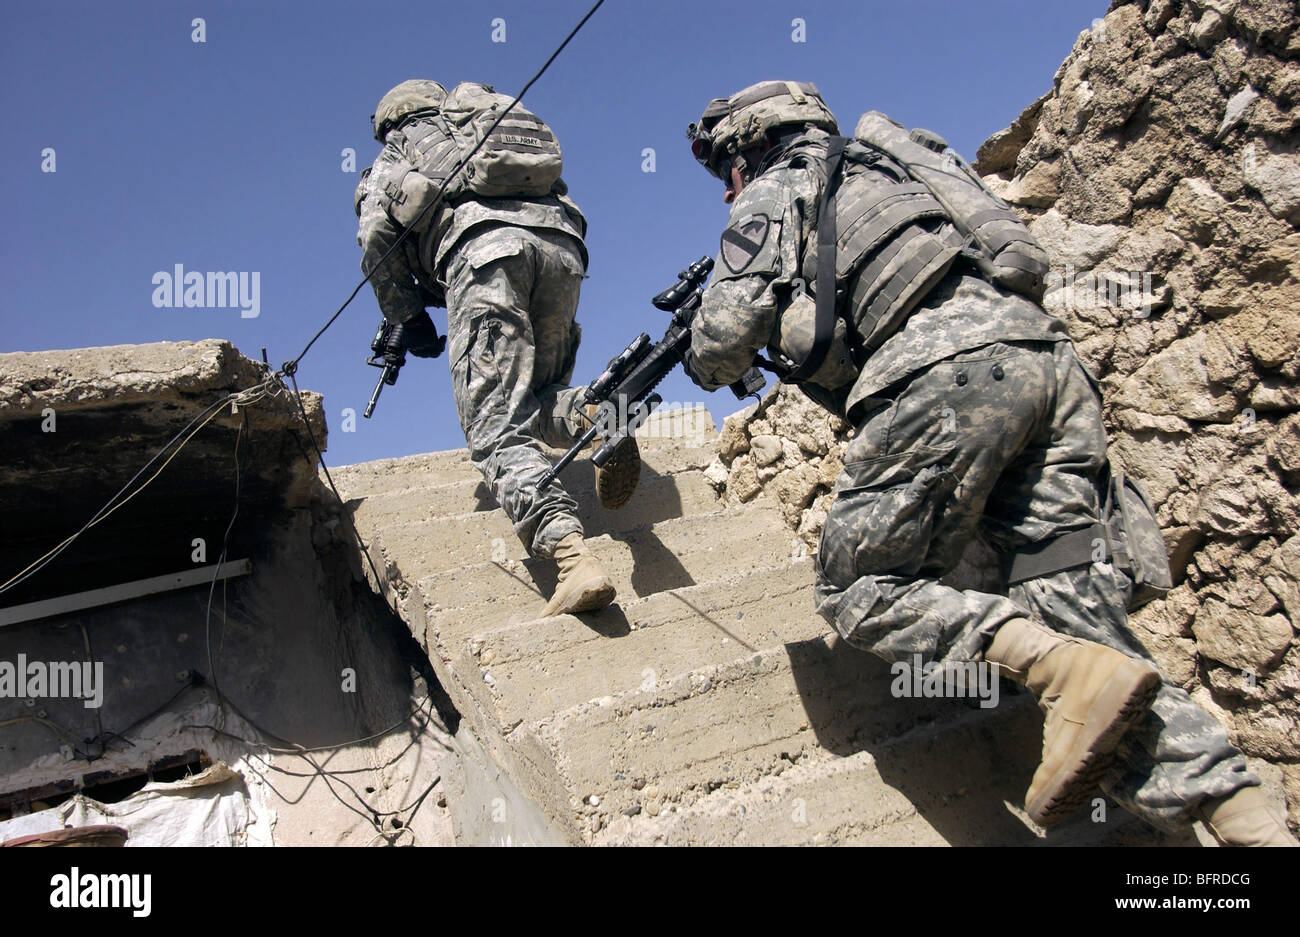 Soldiers running up staircase of a building during a mission in Mosul, Iraq. Stock Photo